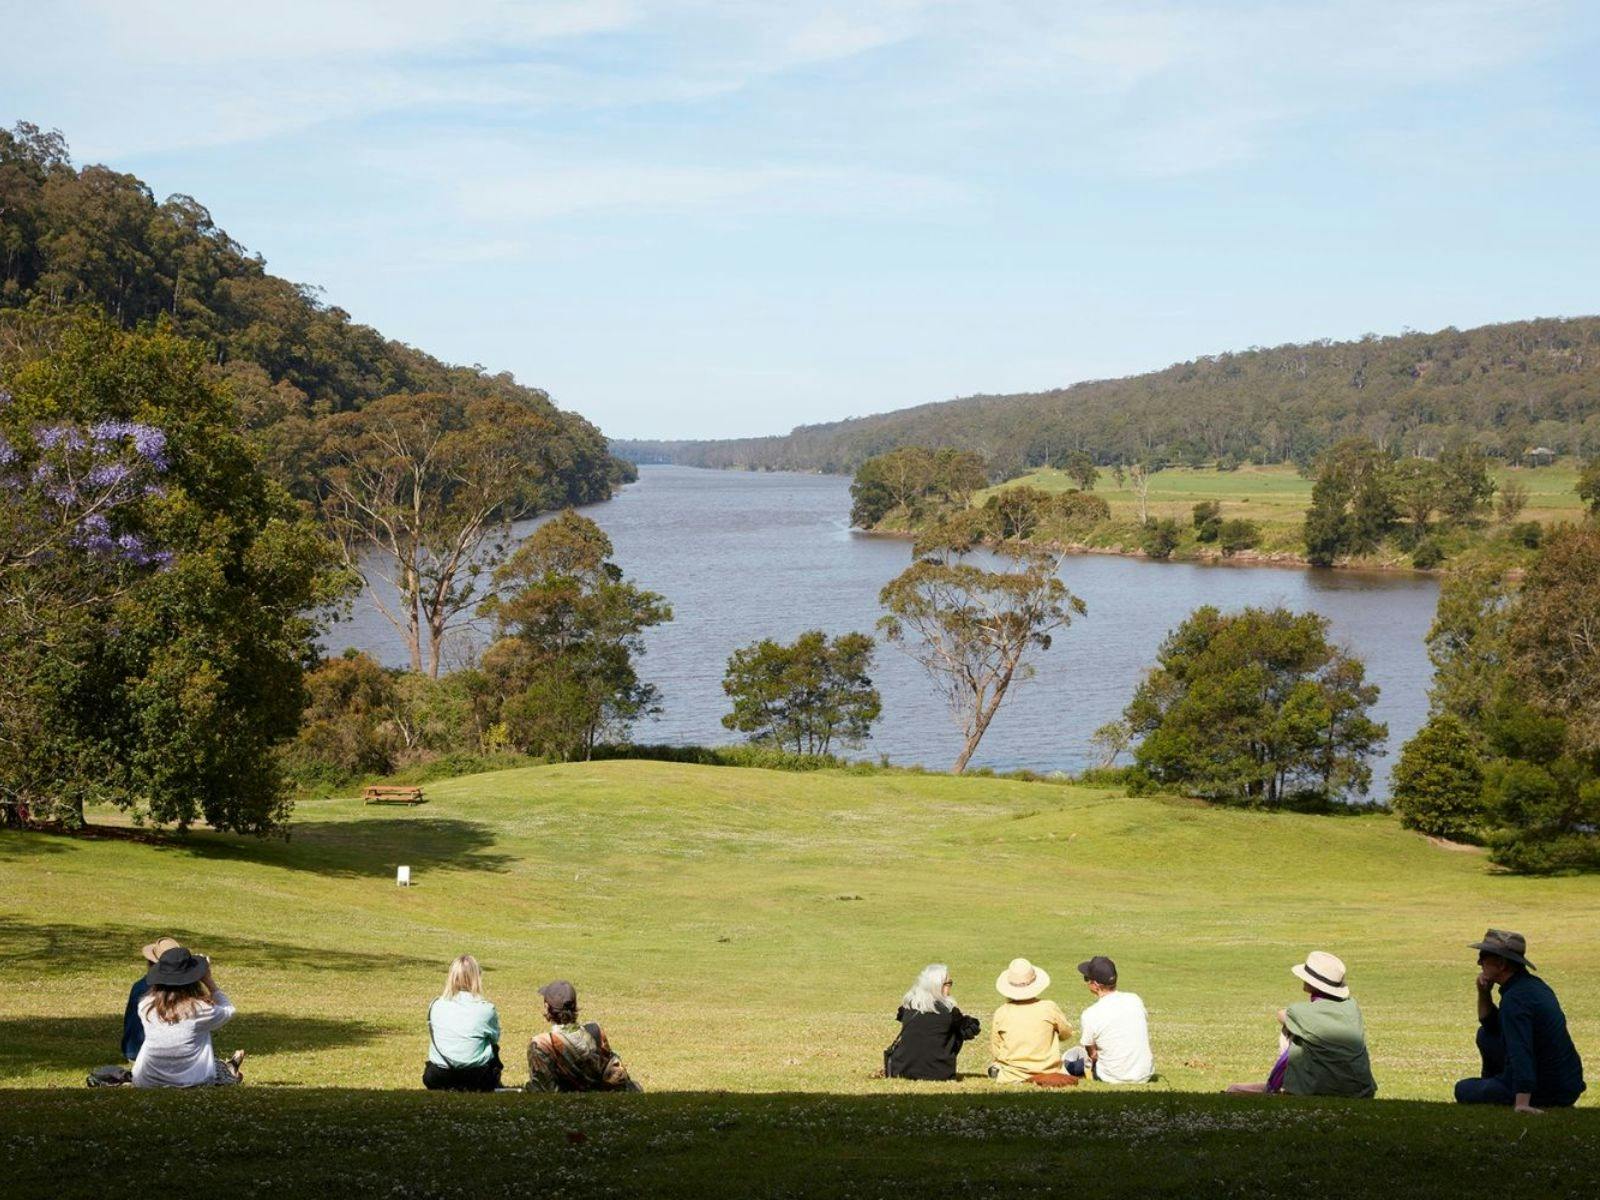 View of the Shoalhaven River